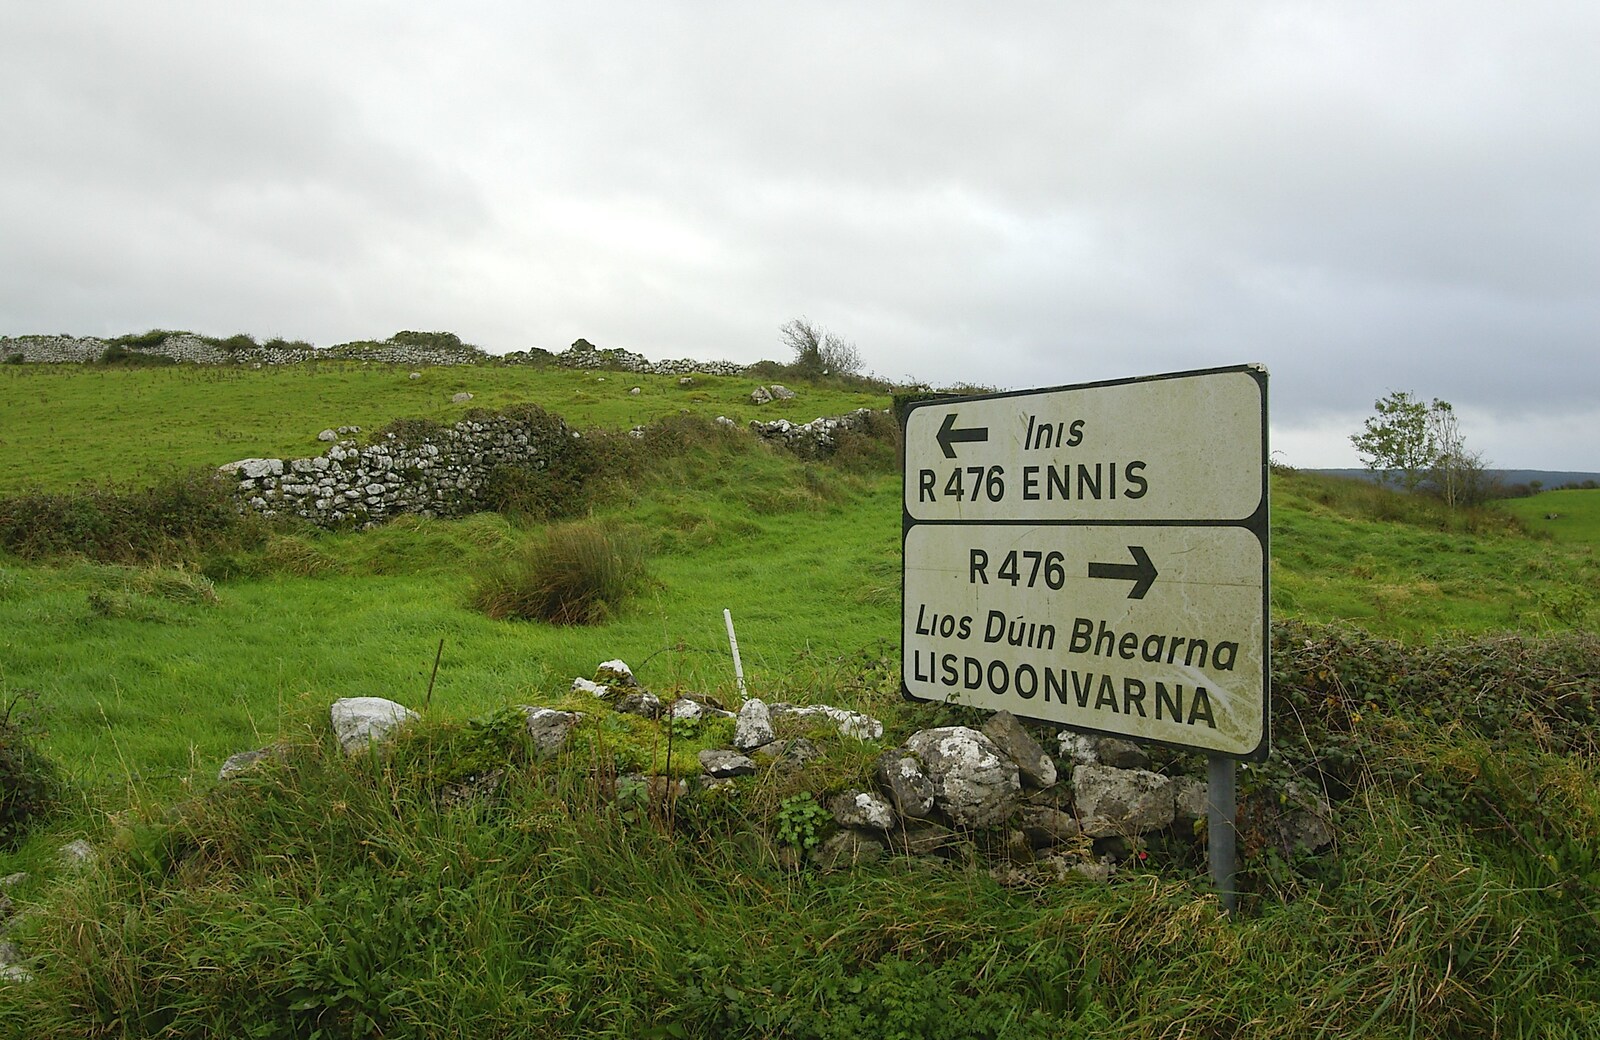 Road sign to Ennis and Lisdoonvarna from Corofin, Ennistymon and The Burran, County Clare, Western Ireland - 27th October 2006